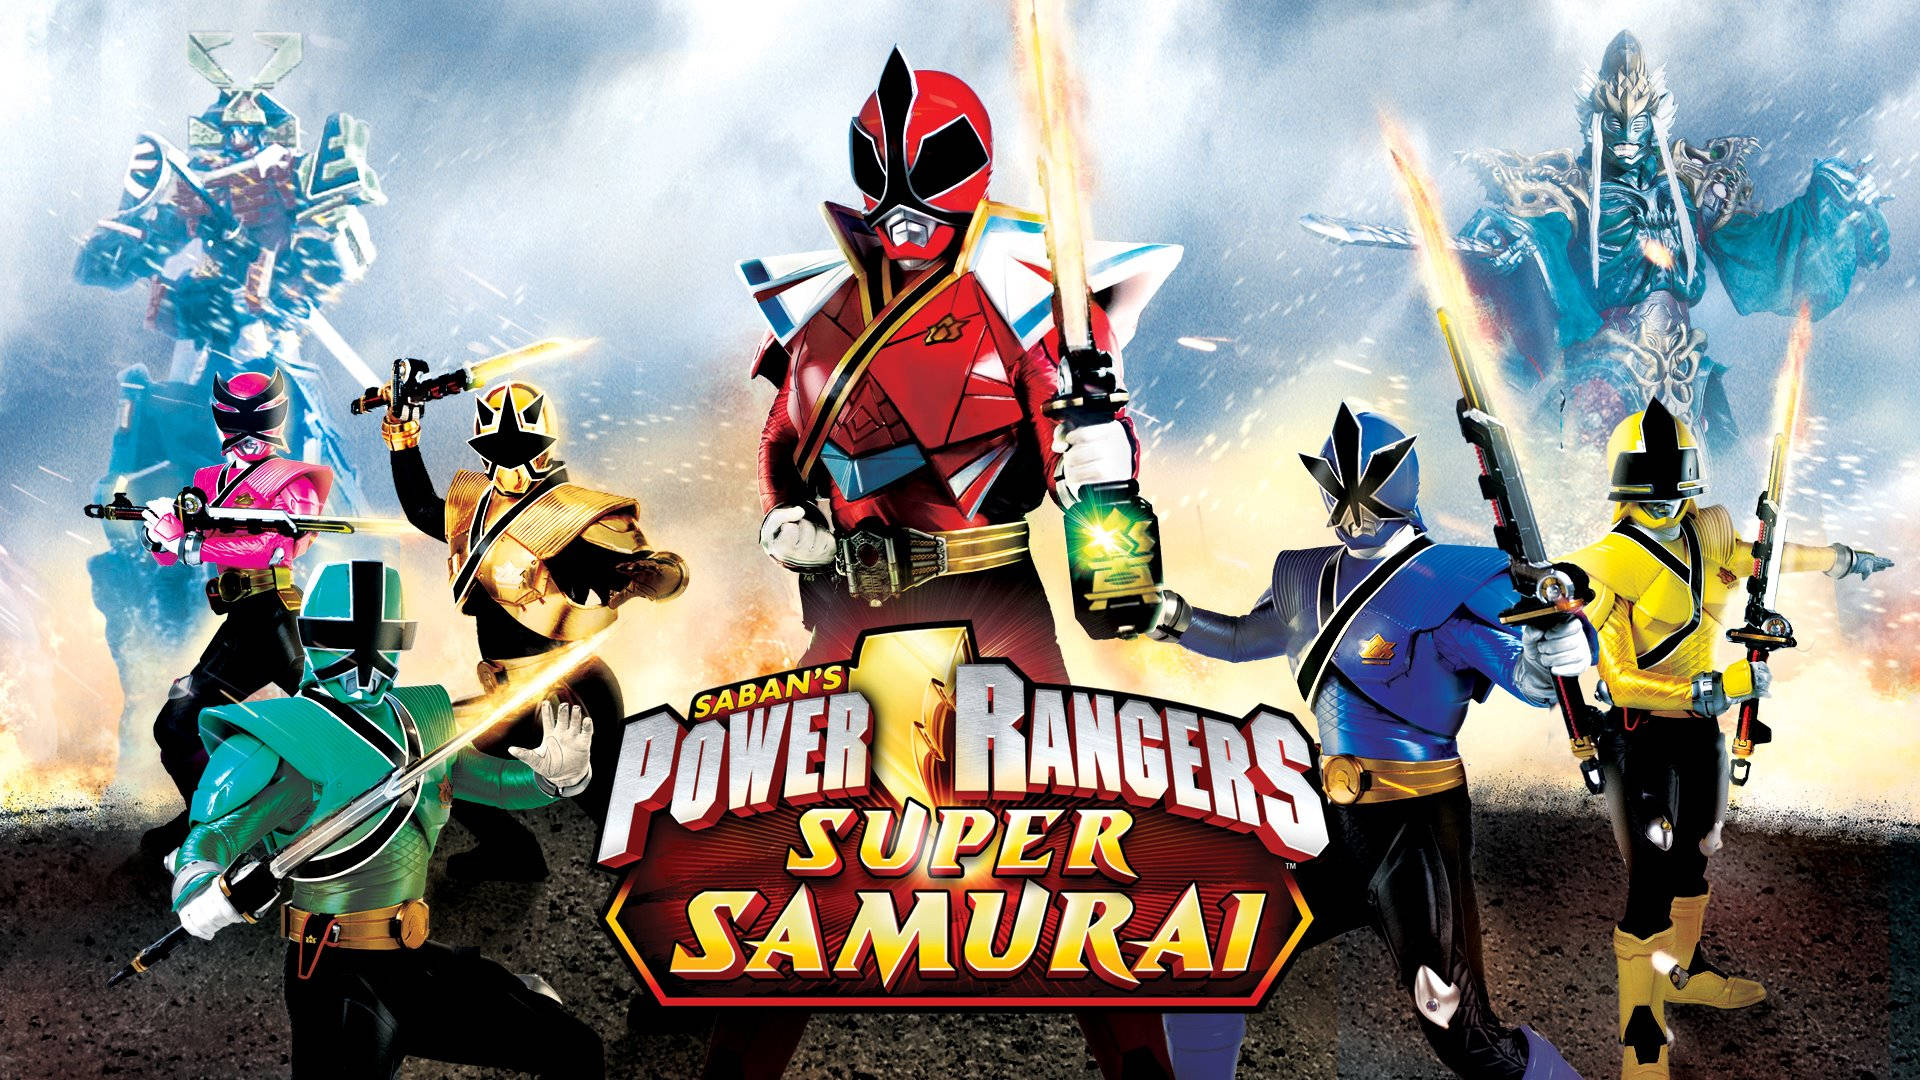 Power Rangers - The Mighty Super Samurai Force Background